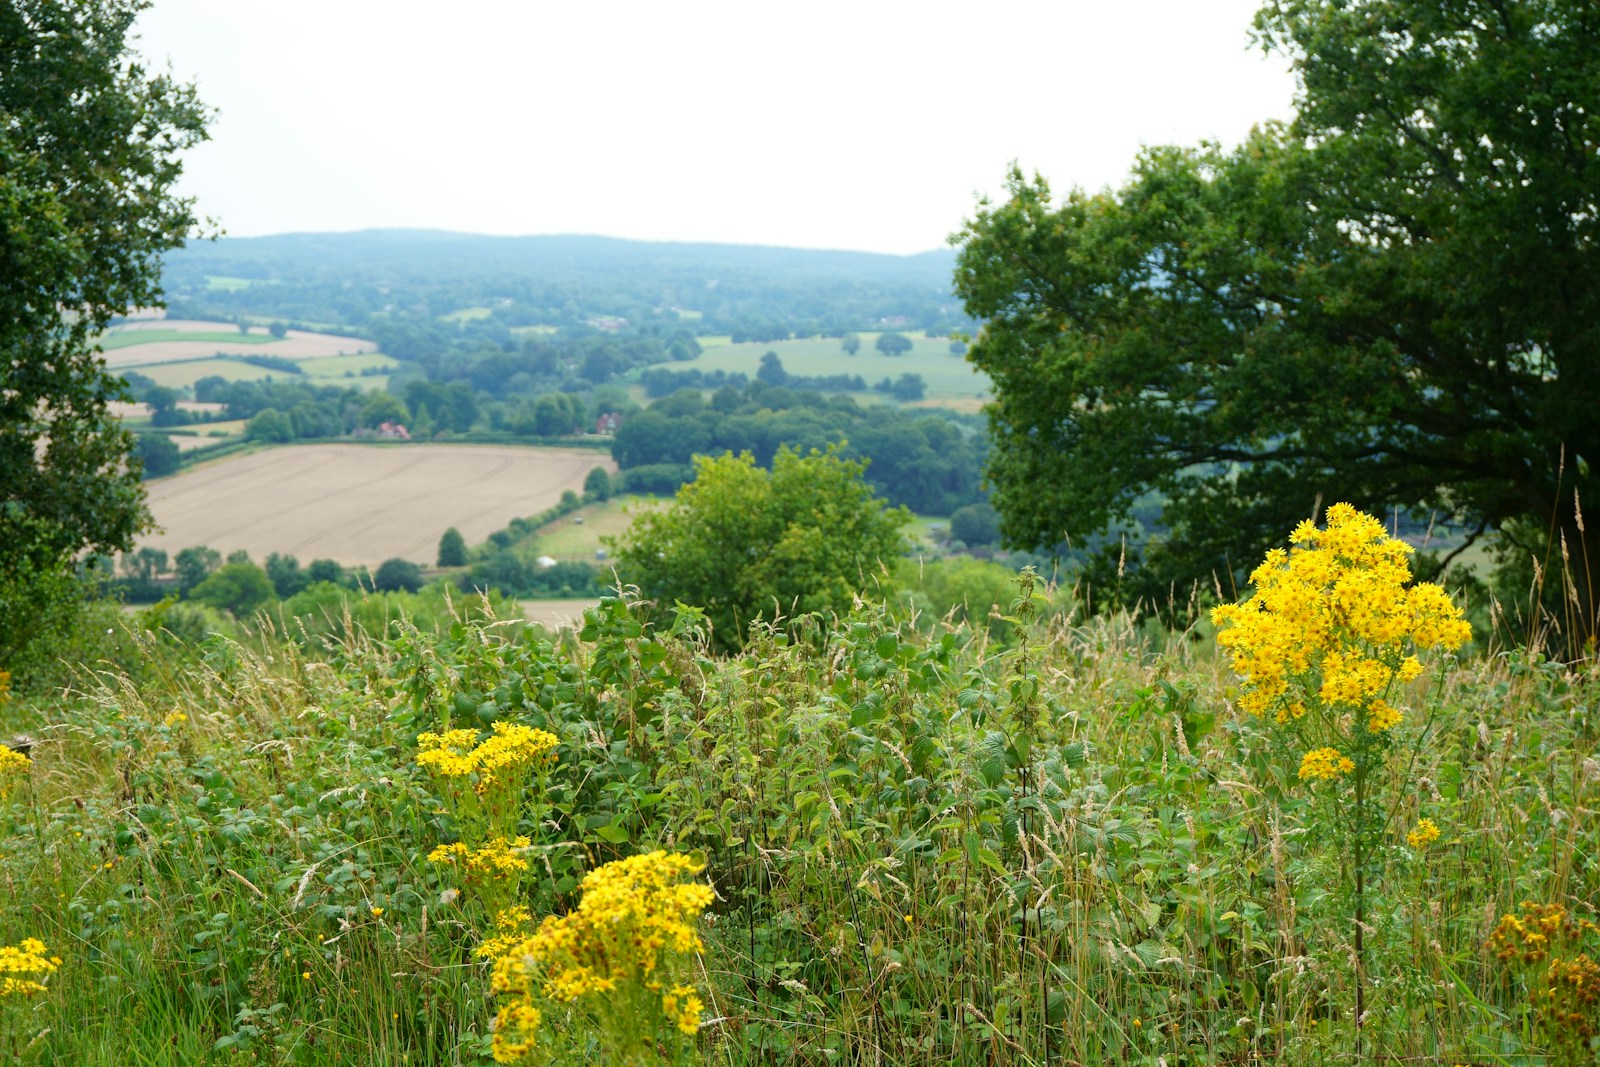 How county councils are developing Local Environmental Improvement Plans framework